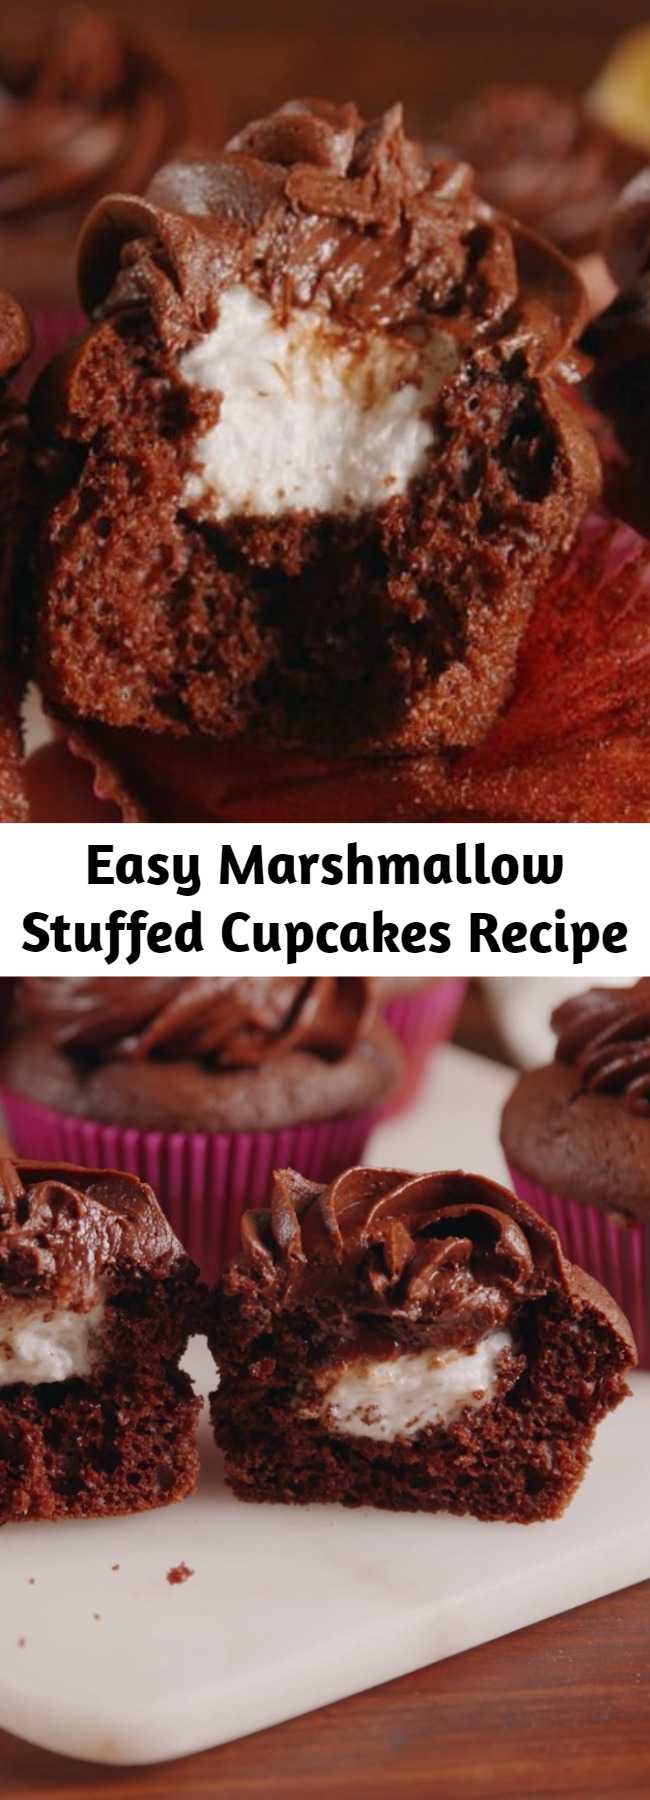 Easy Marshmallow Stuffed Cupcakes Recipe - The only thing that makes a chocolate cupcake better? A gooey marshmallow center. The gooeyness factor on these babies is through the roof.